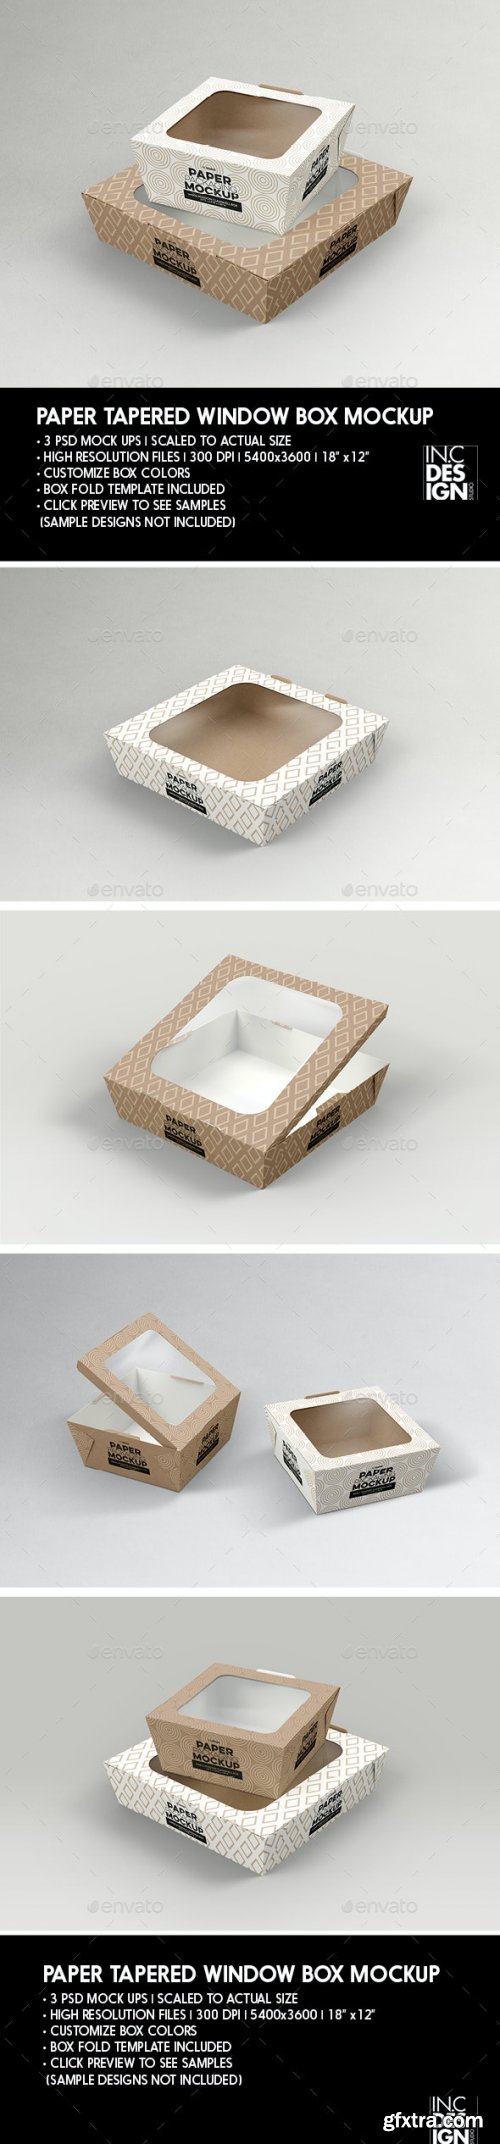 GraphicRiver - Paper Tapered Window Boxes Packaging Mockup 26665459